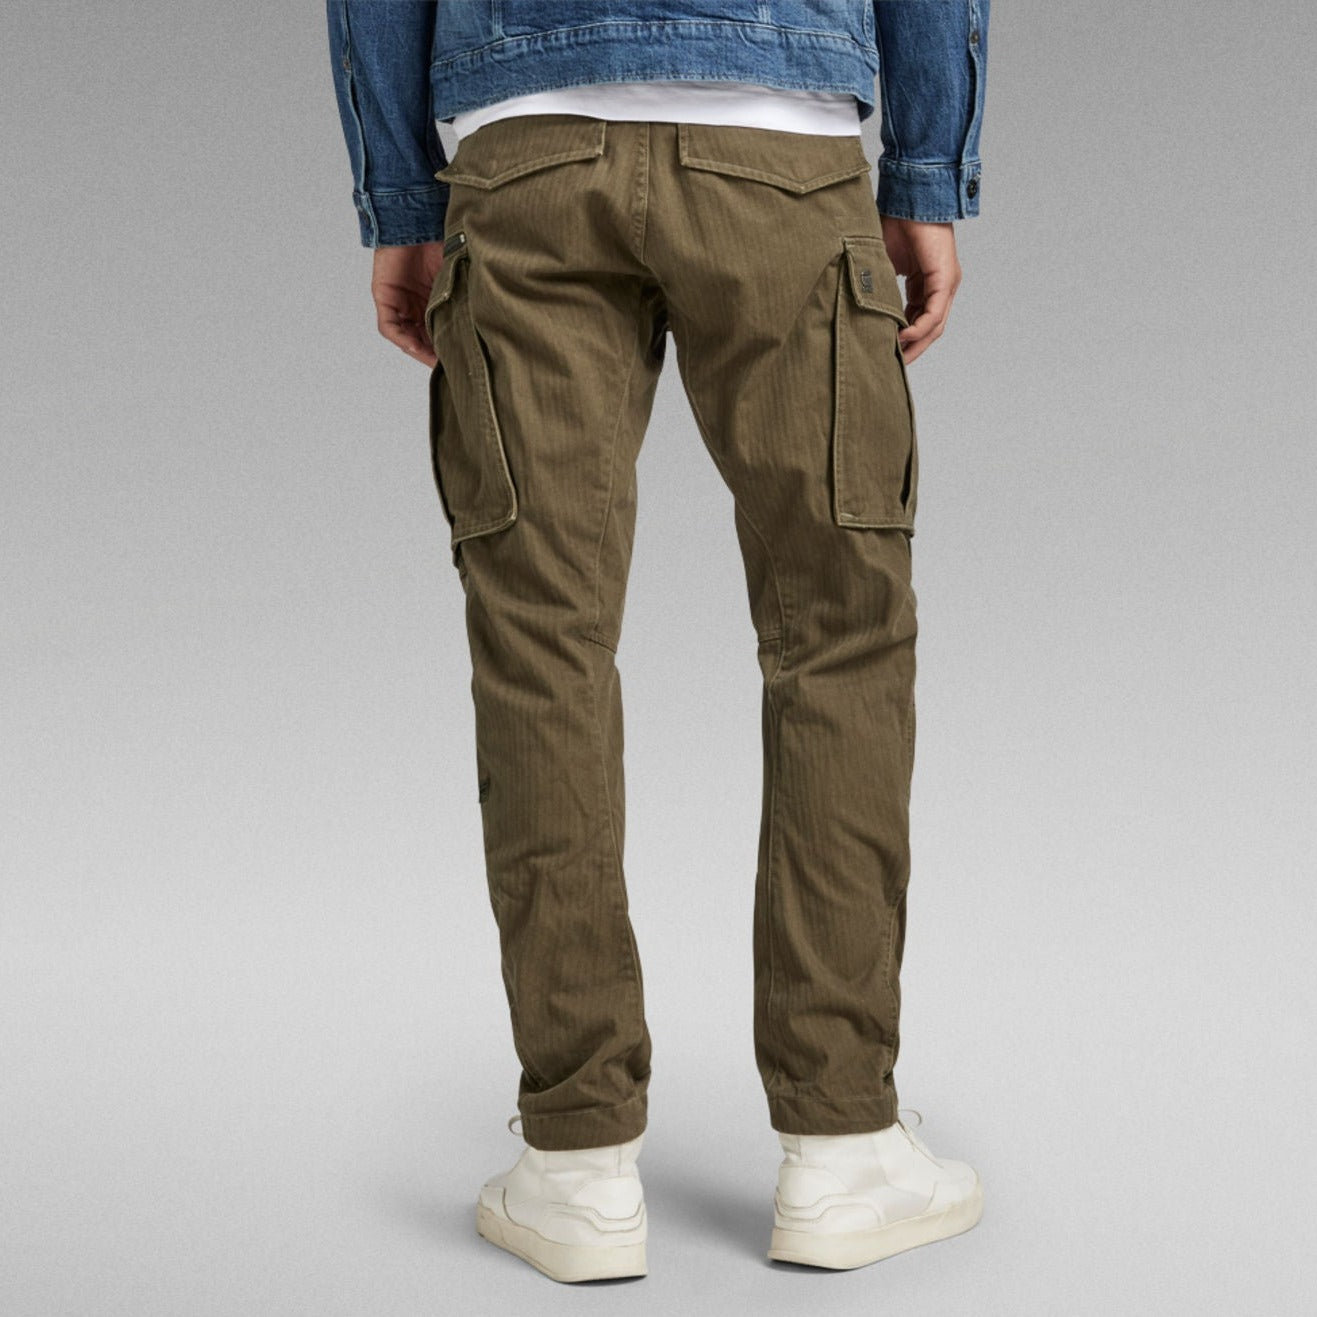 G-Star Raw - Rovic Zip 3D Regular Tapered - Shadow Olive